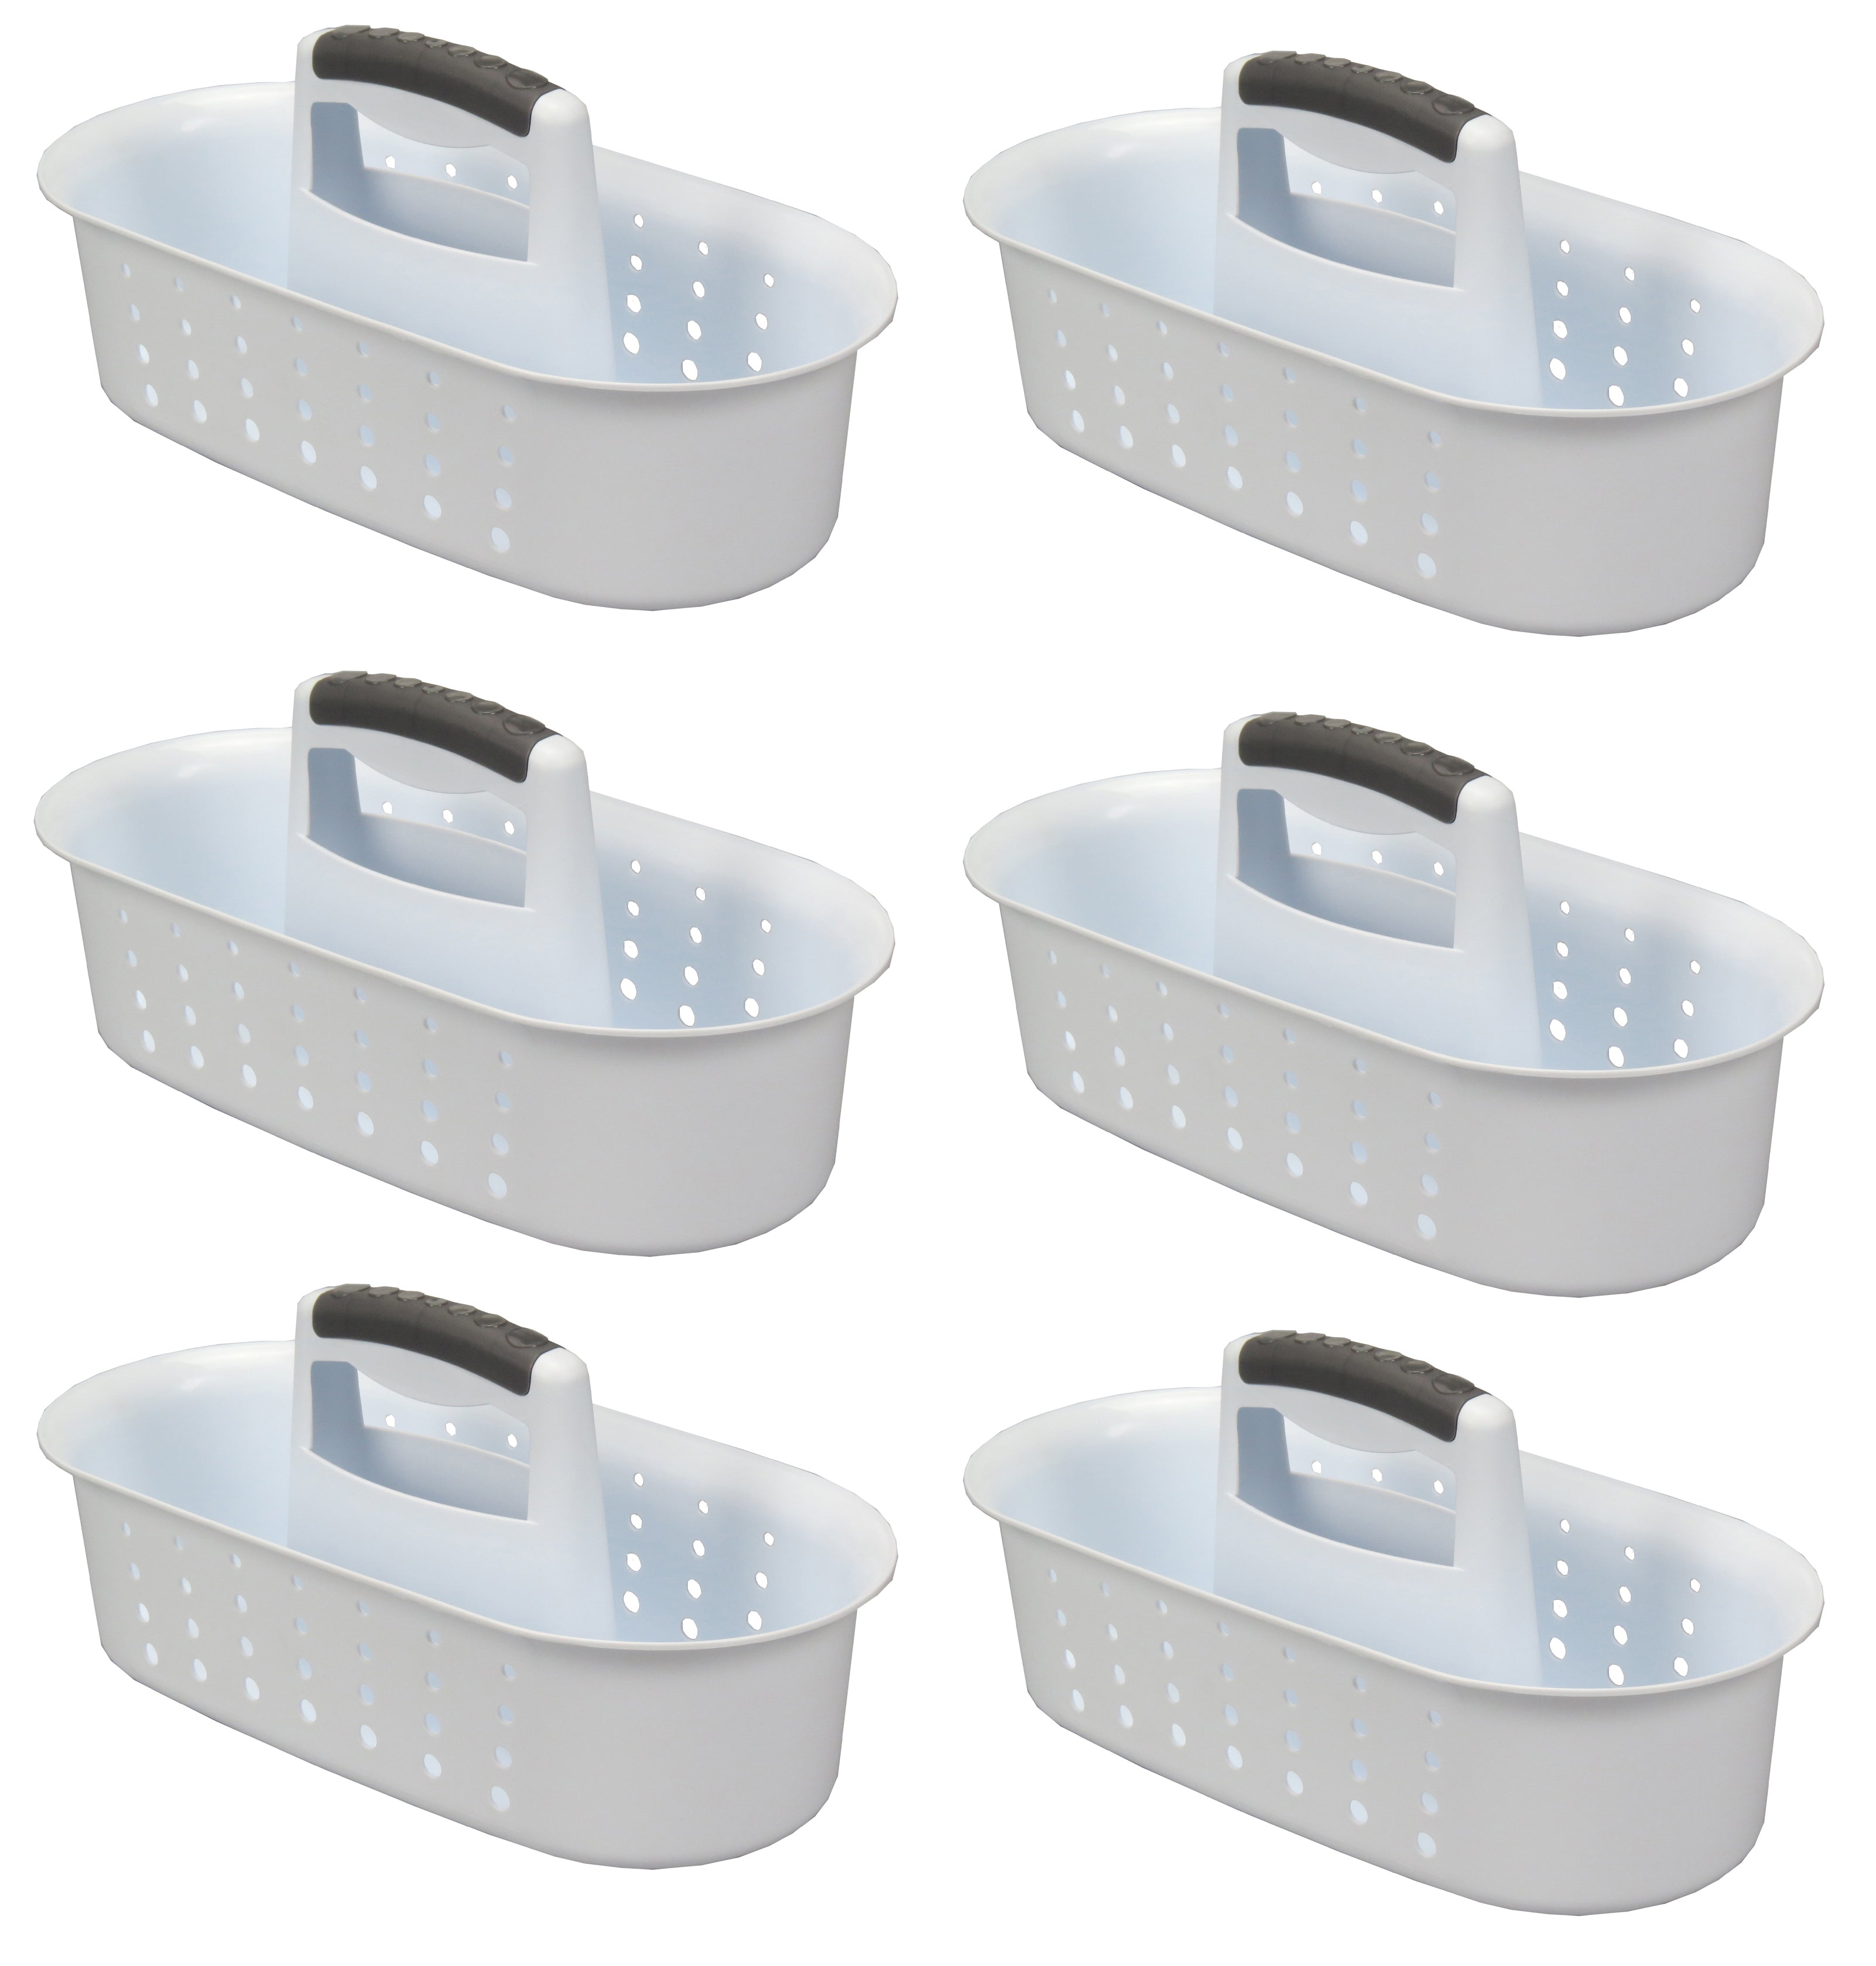 American Maid Household Caddy, Set of 6